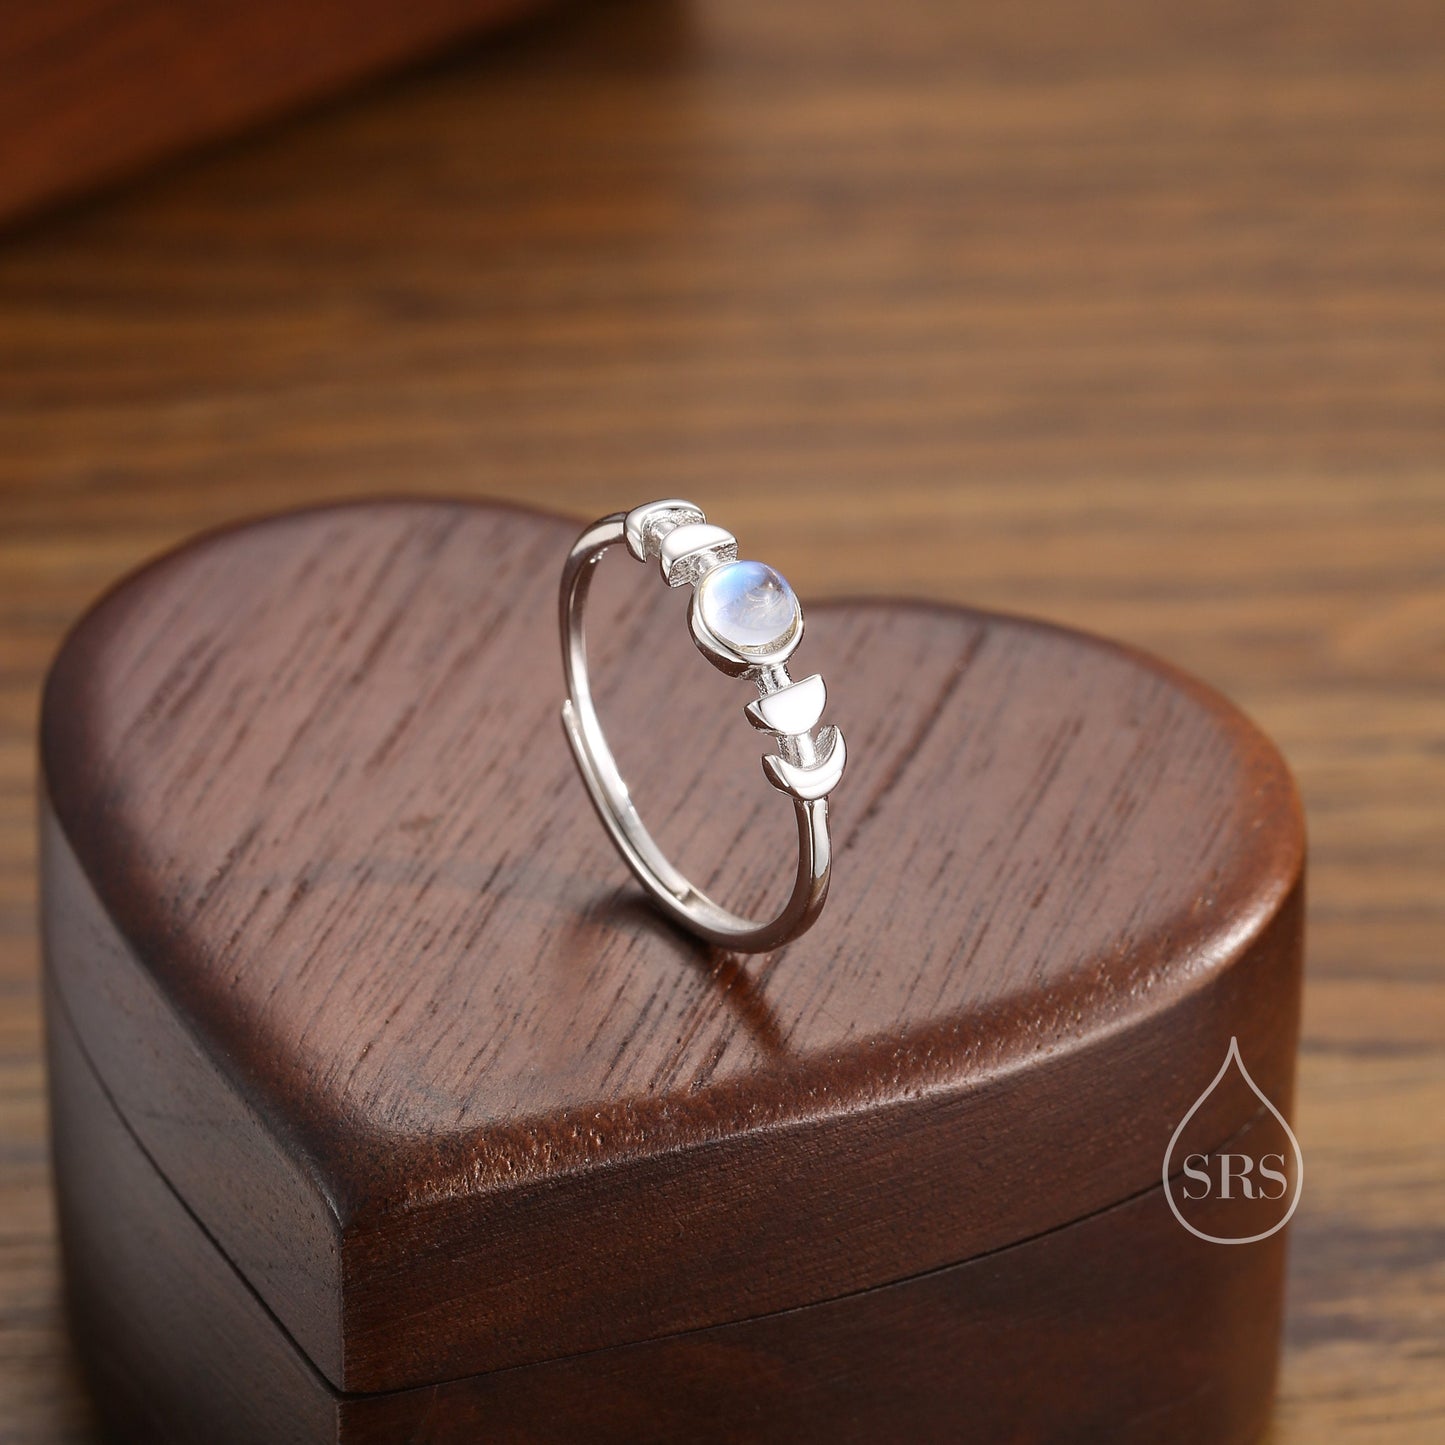 Sterling Silver Moon Phase Ring with Simulated Moonstone, Adjustable Size, Celestial Jewellery, Dainty and Delicate, Moon Ring